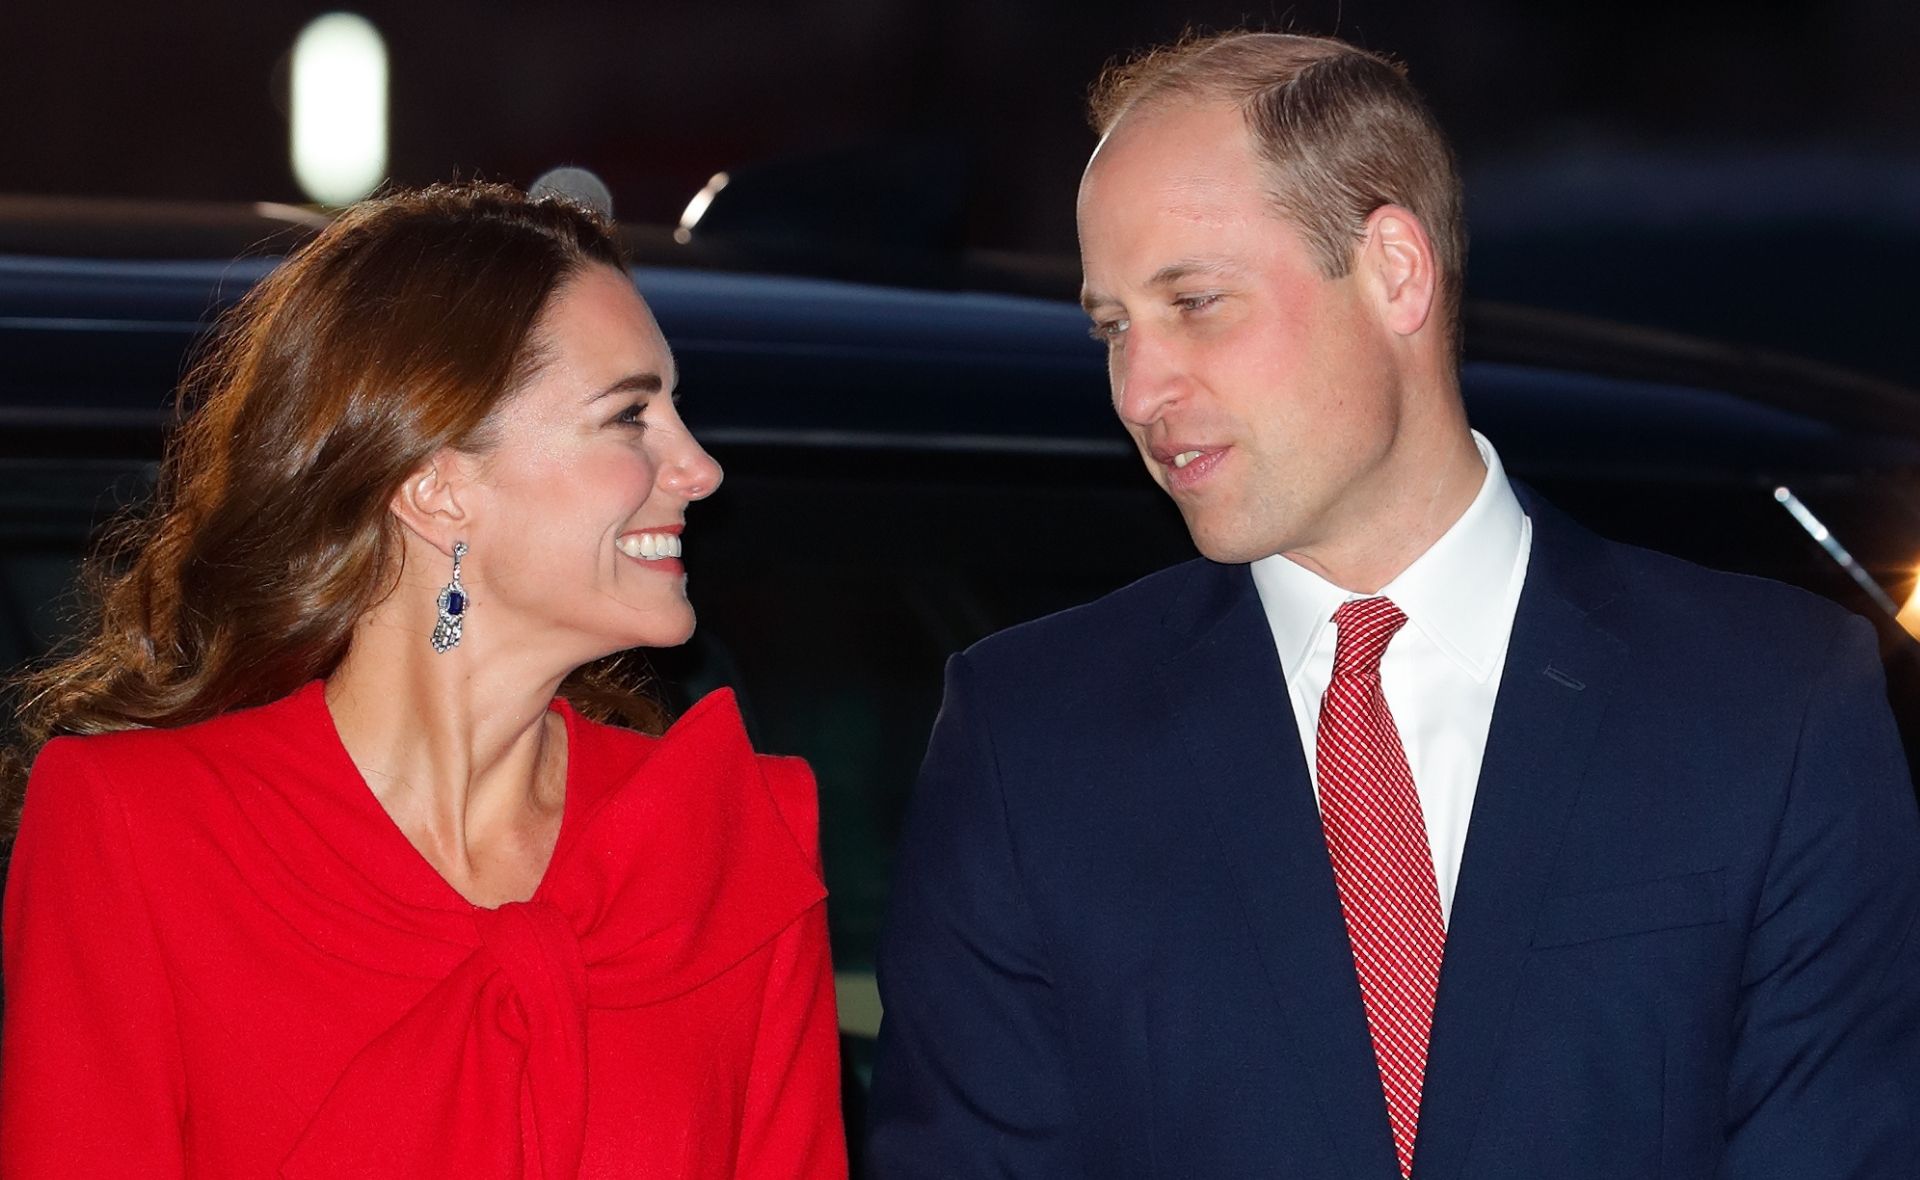 EXCLUSIVE: Prince William’s romantic mini break plans for his and Kate Middleton’s anniversary